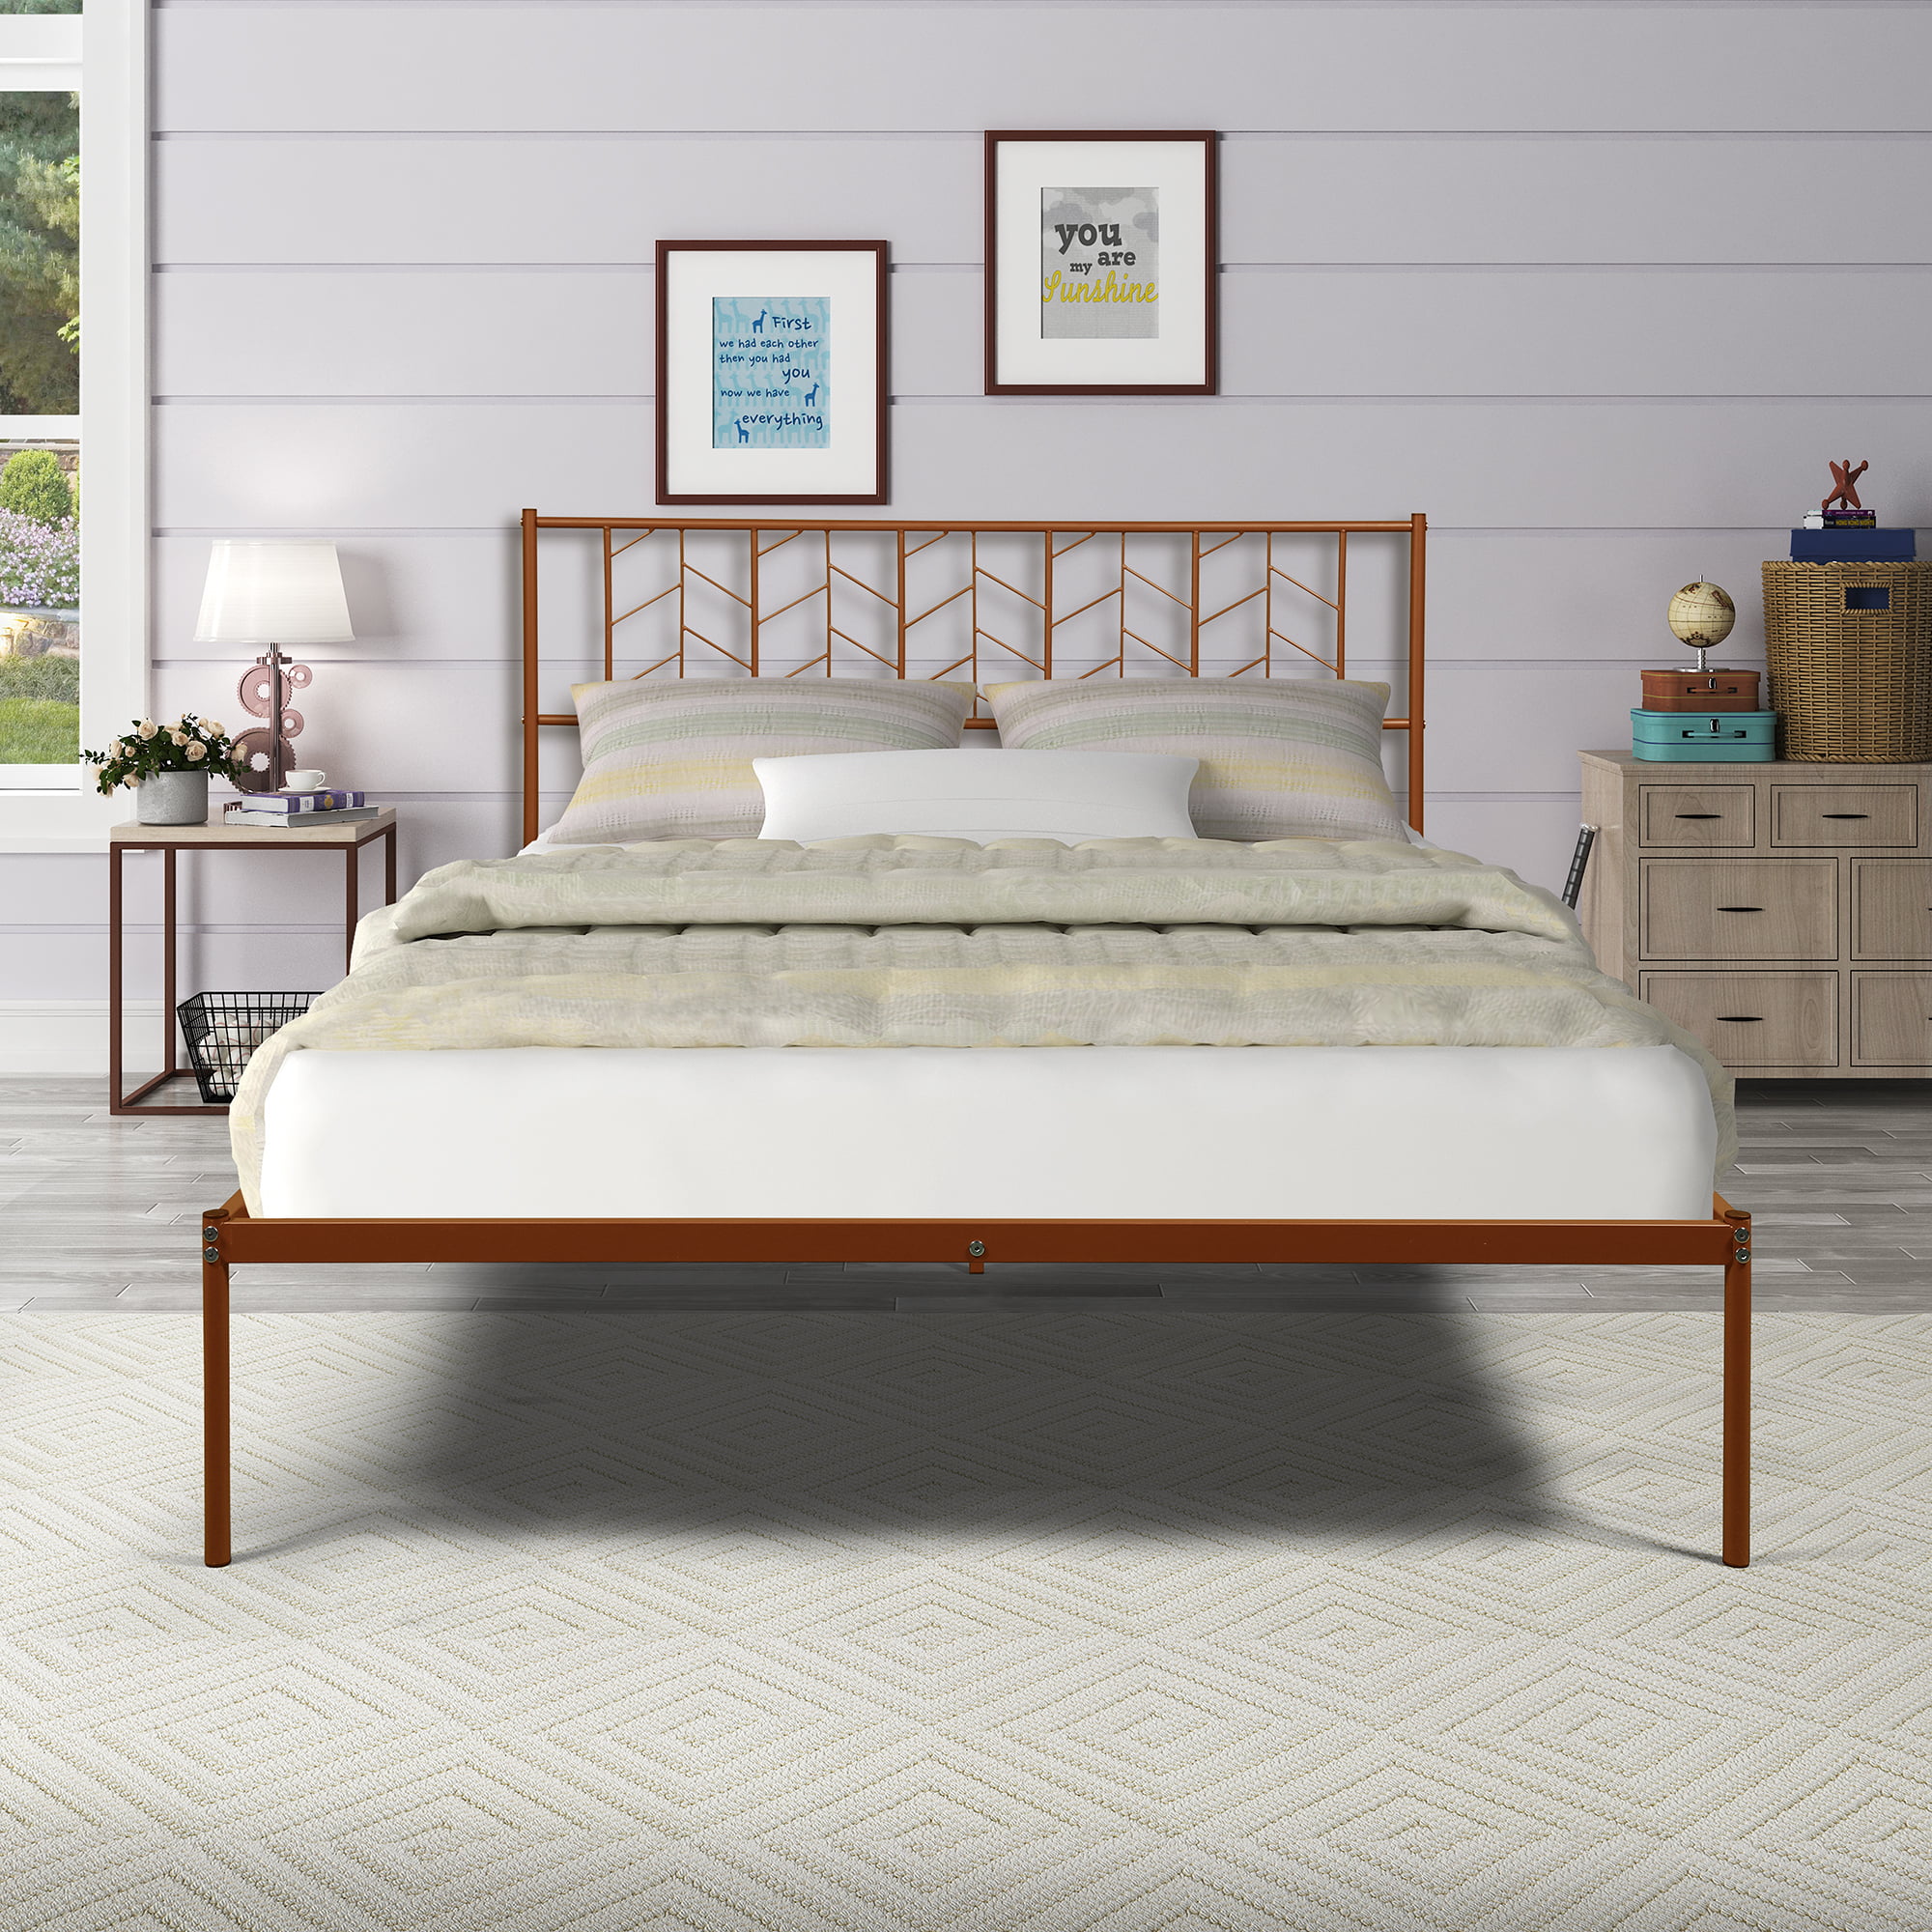 Queen Bed Frame No Box Spring Needed, Queen Bed Frame With Headboard Box Spring Needed